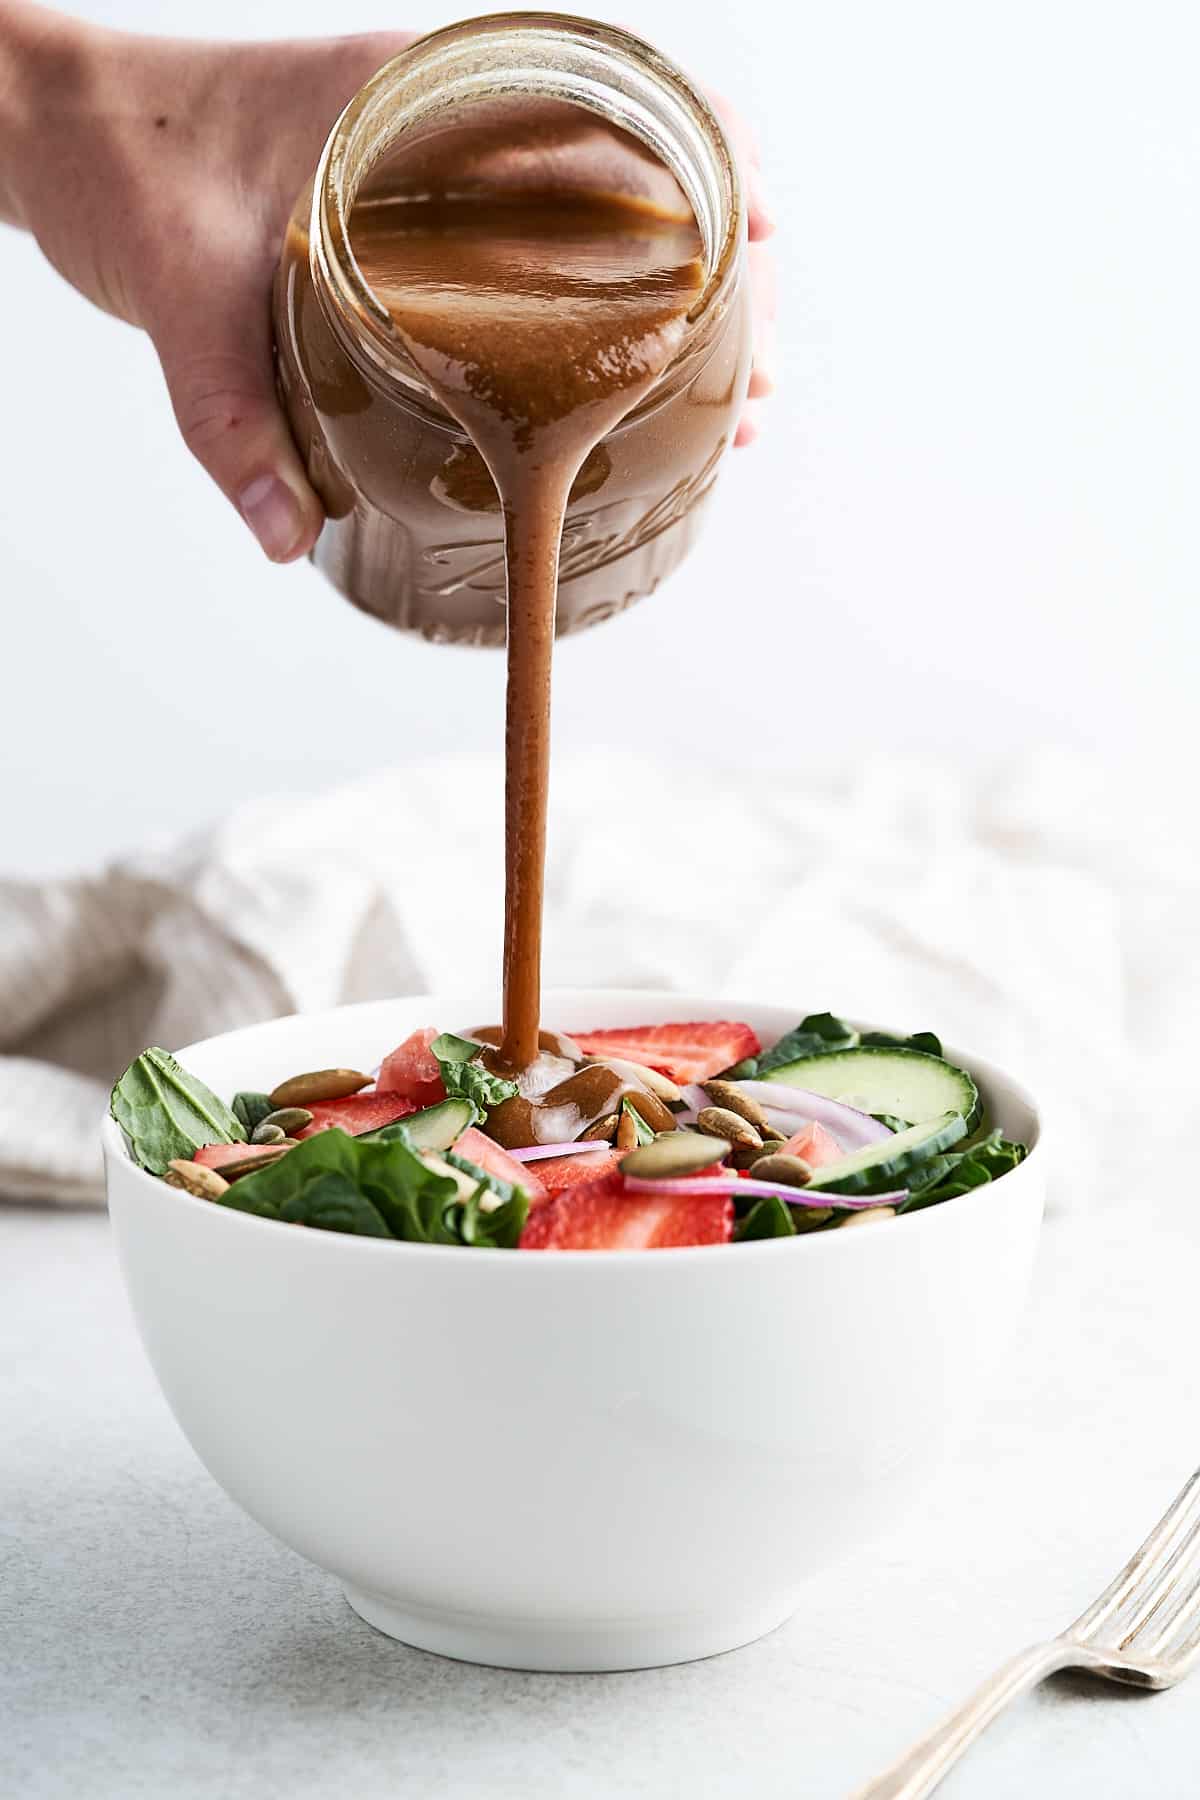 Pouring oil and vinegar dressing over salad.